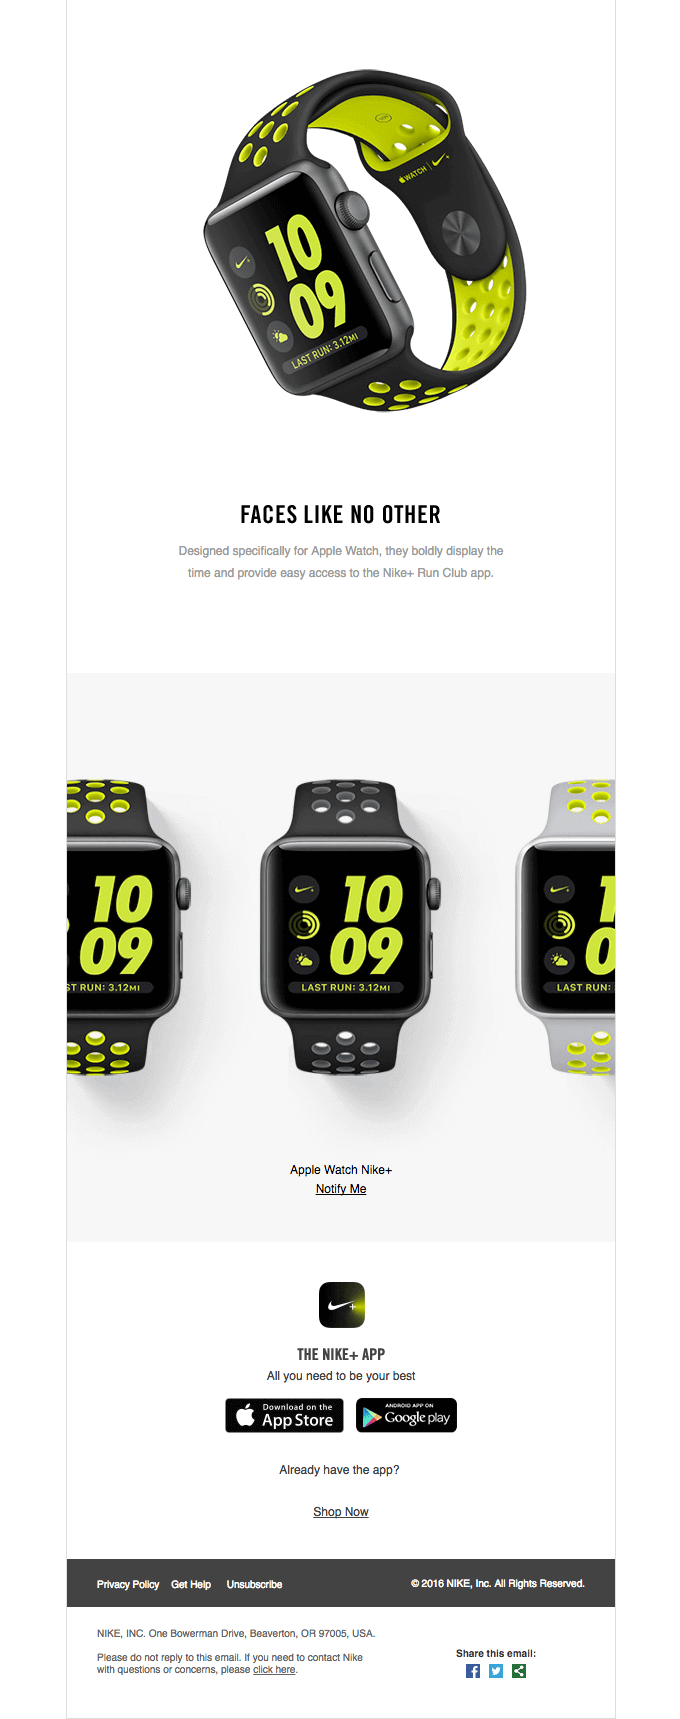 Introducing Apple Watch Nike+ product launch email sample part 2